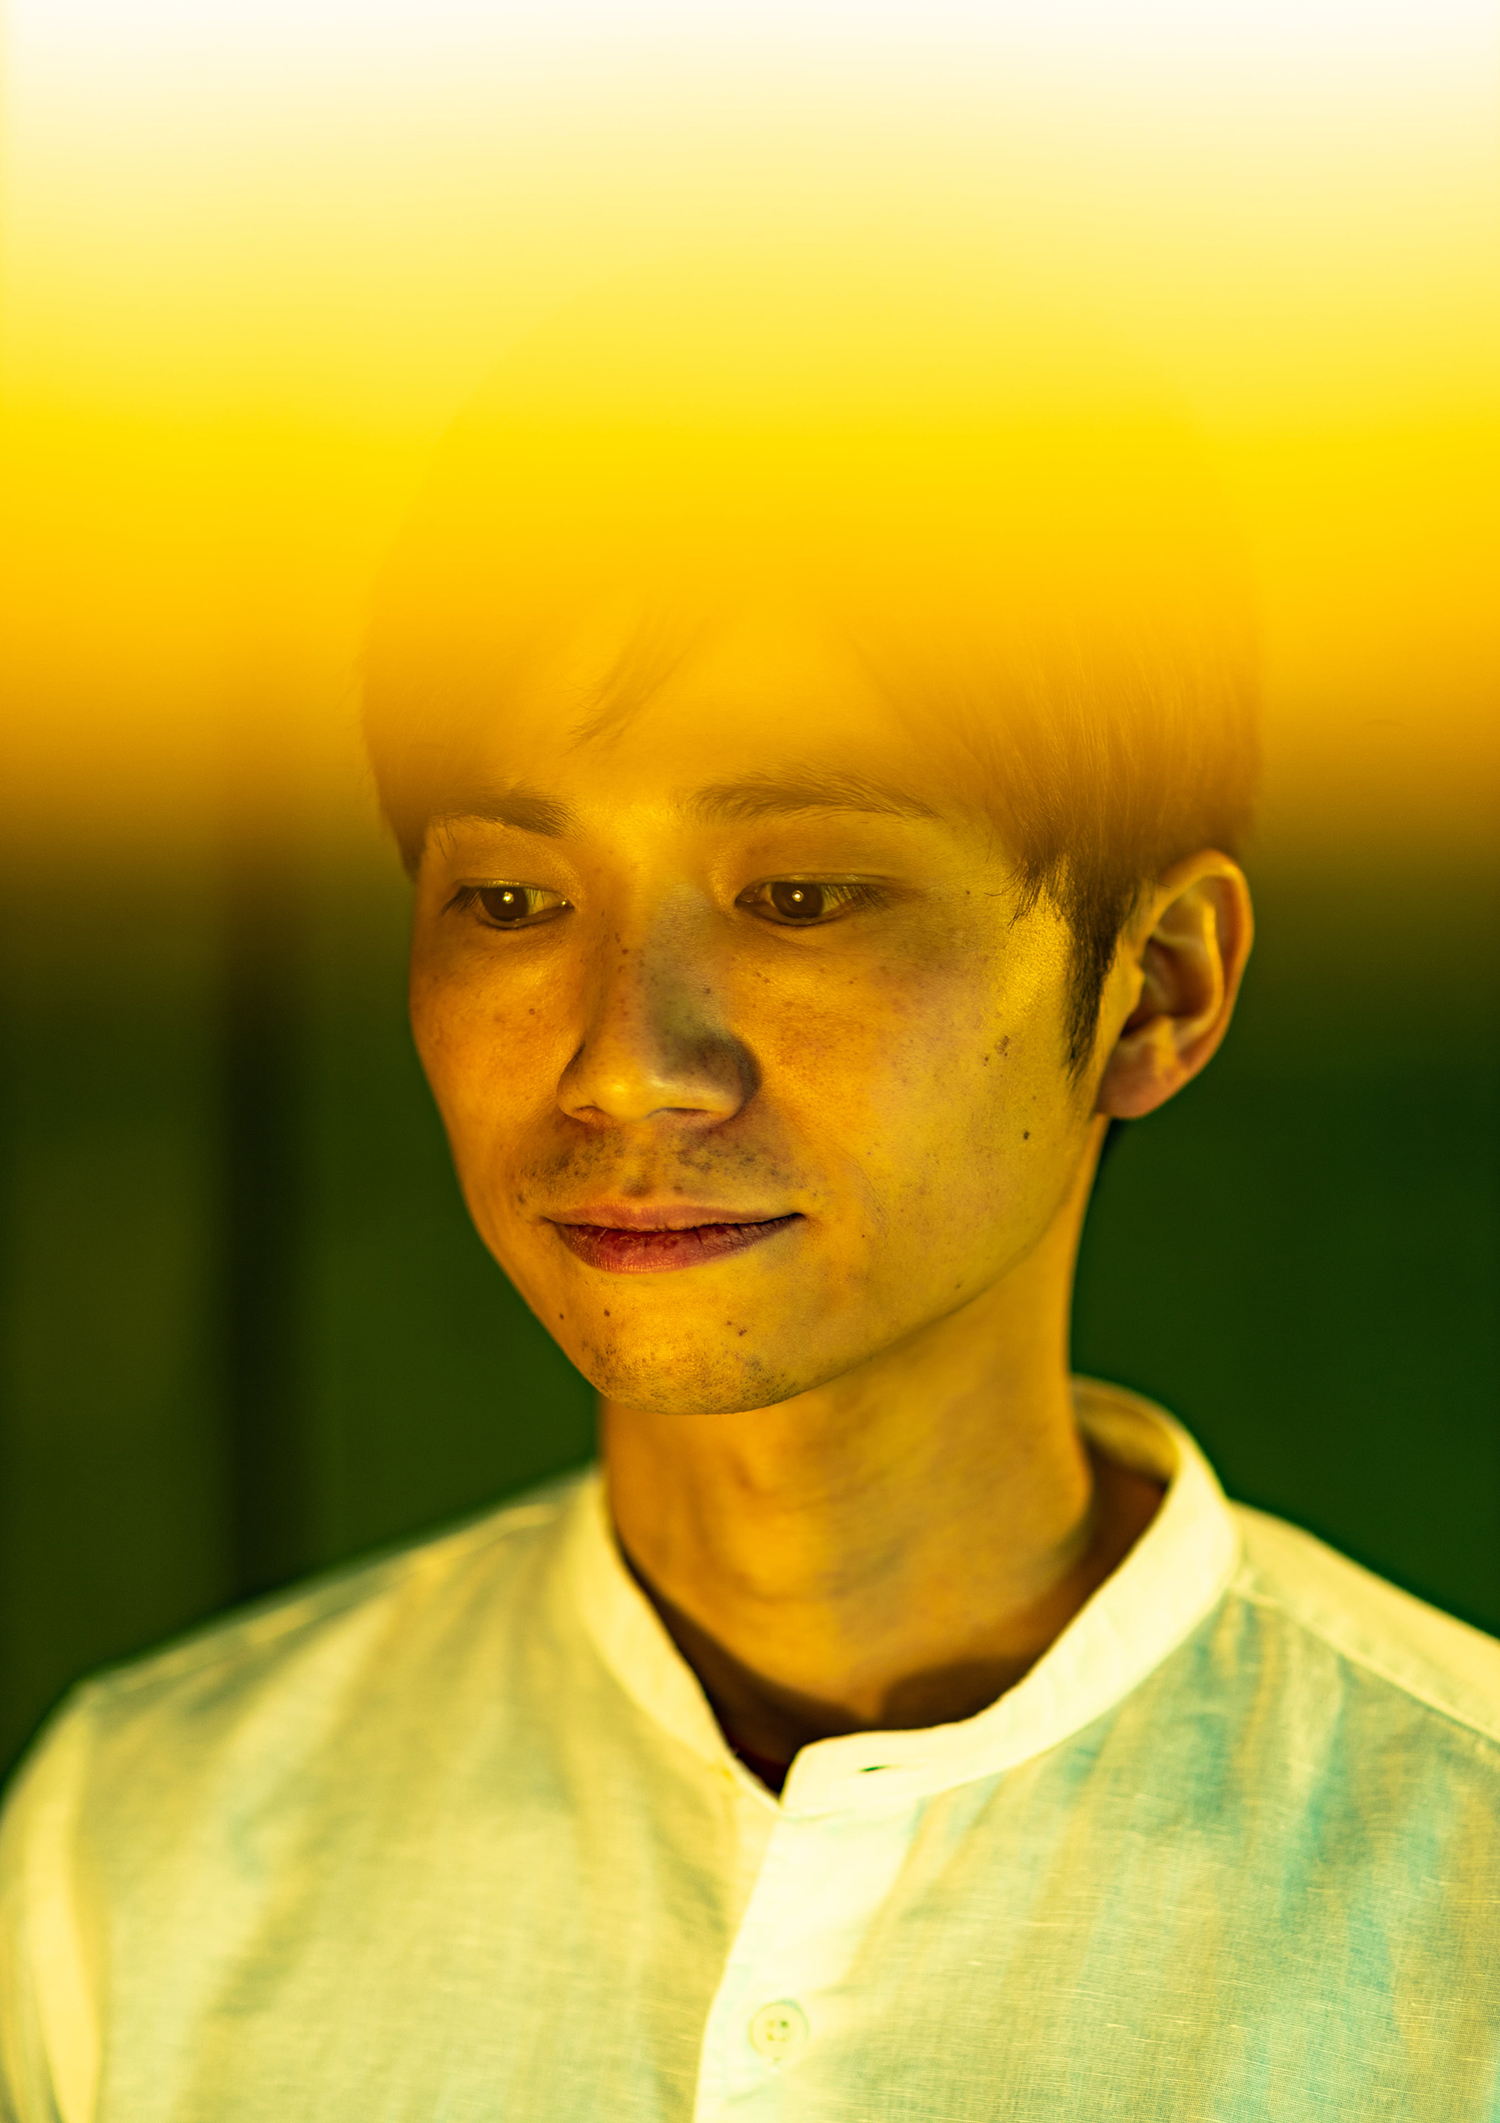 Headshot of Prof. Keisuke Fukuda with a band of orange light covering the top of his head